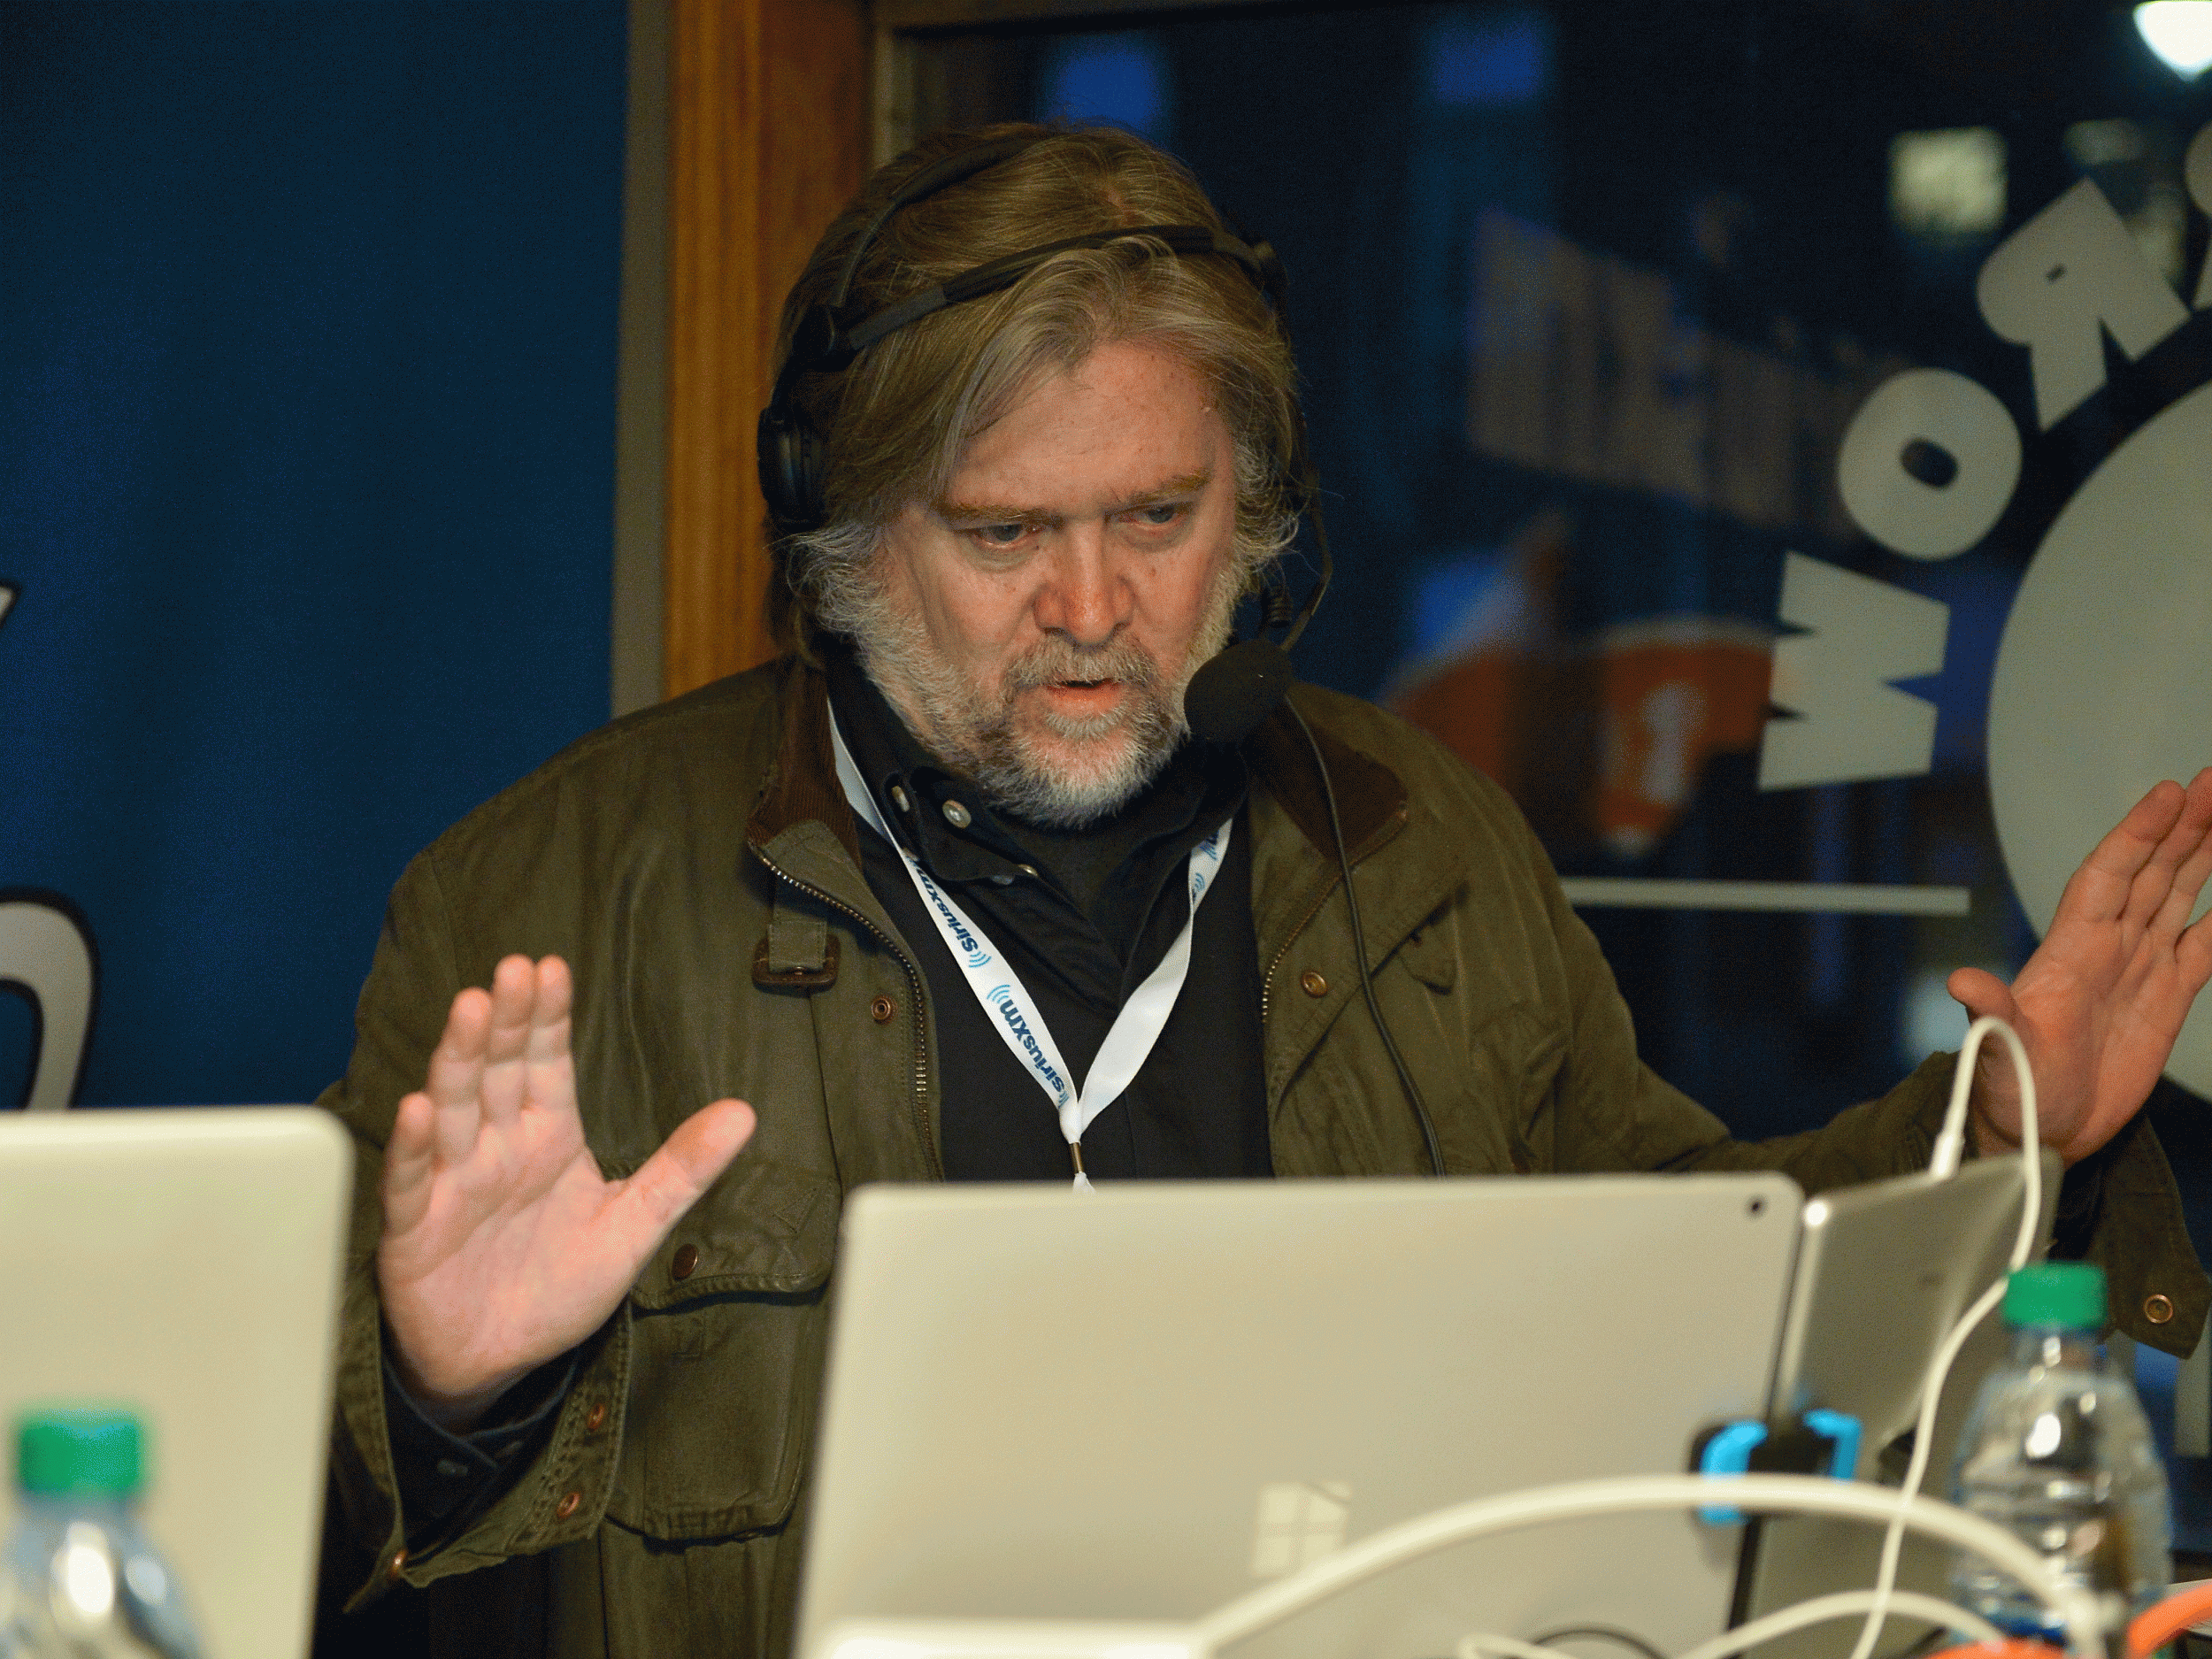 Steve Bannon, now Donald Trump's chief strategist, on radio in New Hampshire during the US election primaries in February (Getty)